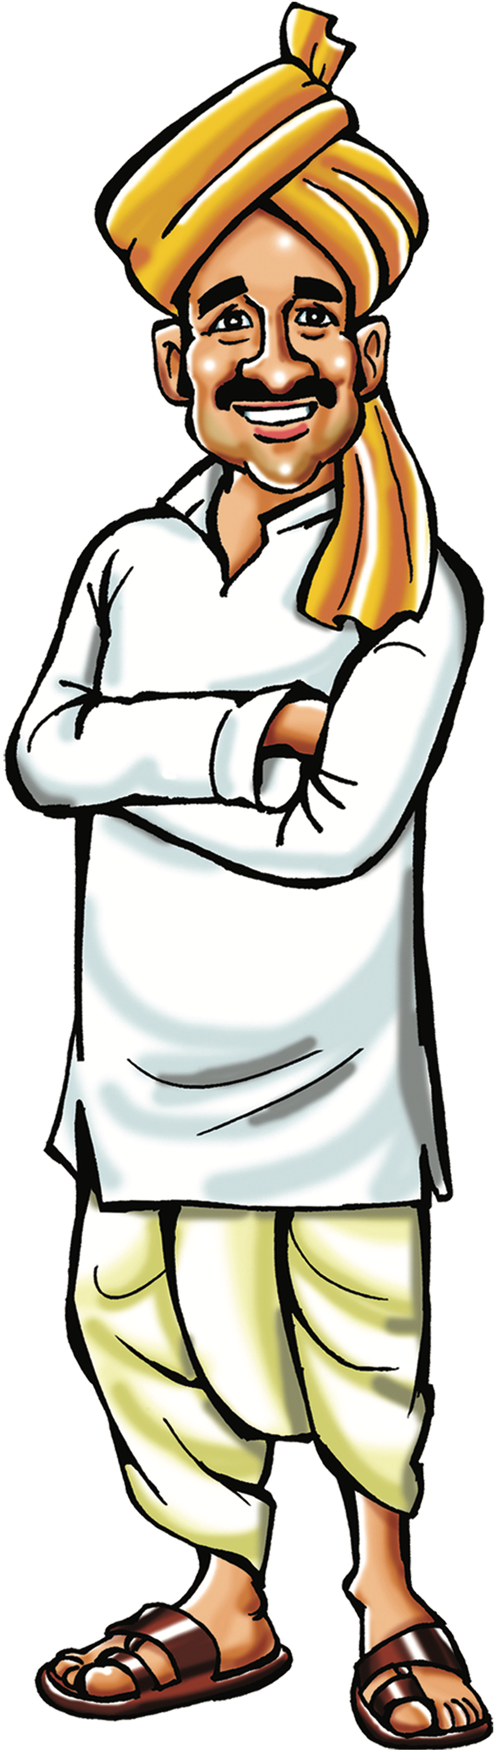 Cartoon Farmer PNG Image with Transparent Background